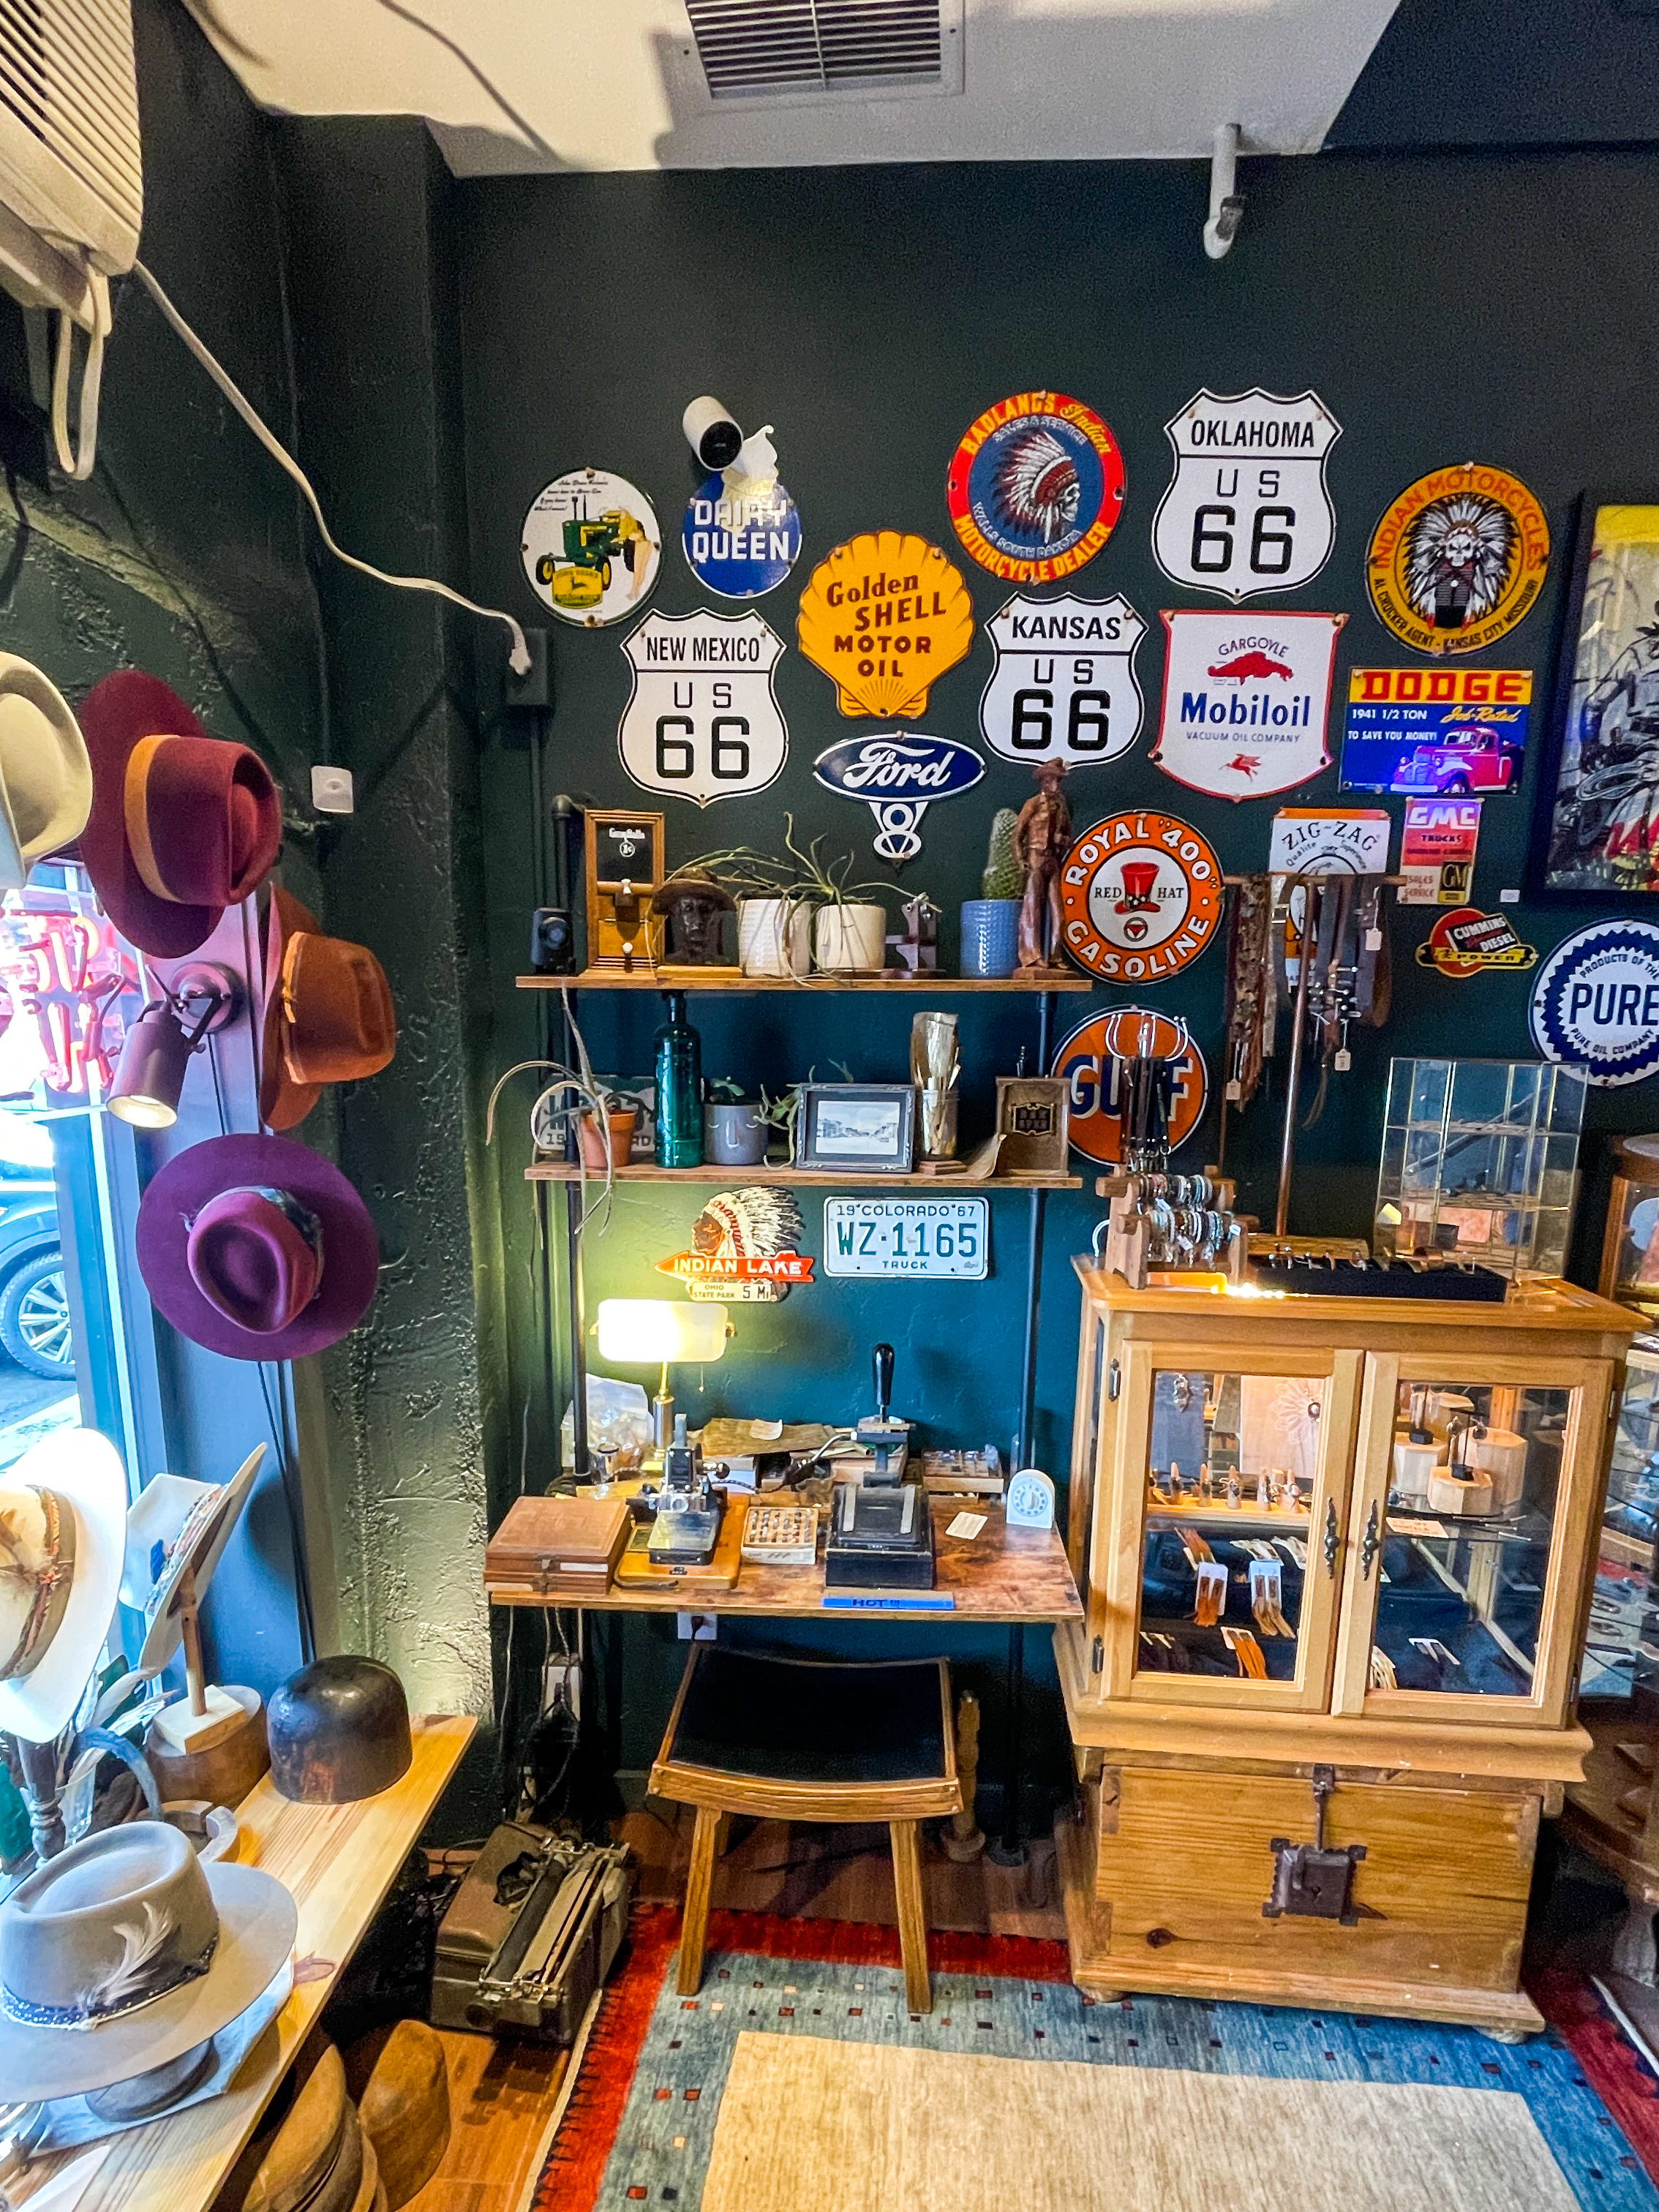 A craft table inside the hat maker’s shop. A collection of hats can be seen on the left, in a street-facing window, in multiple colors. On the deep green wall behind the craft table, numerous metal signs, including several of Route 66, can be seen.